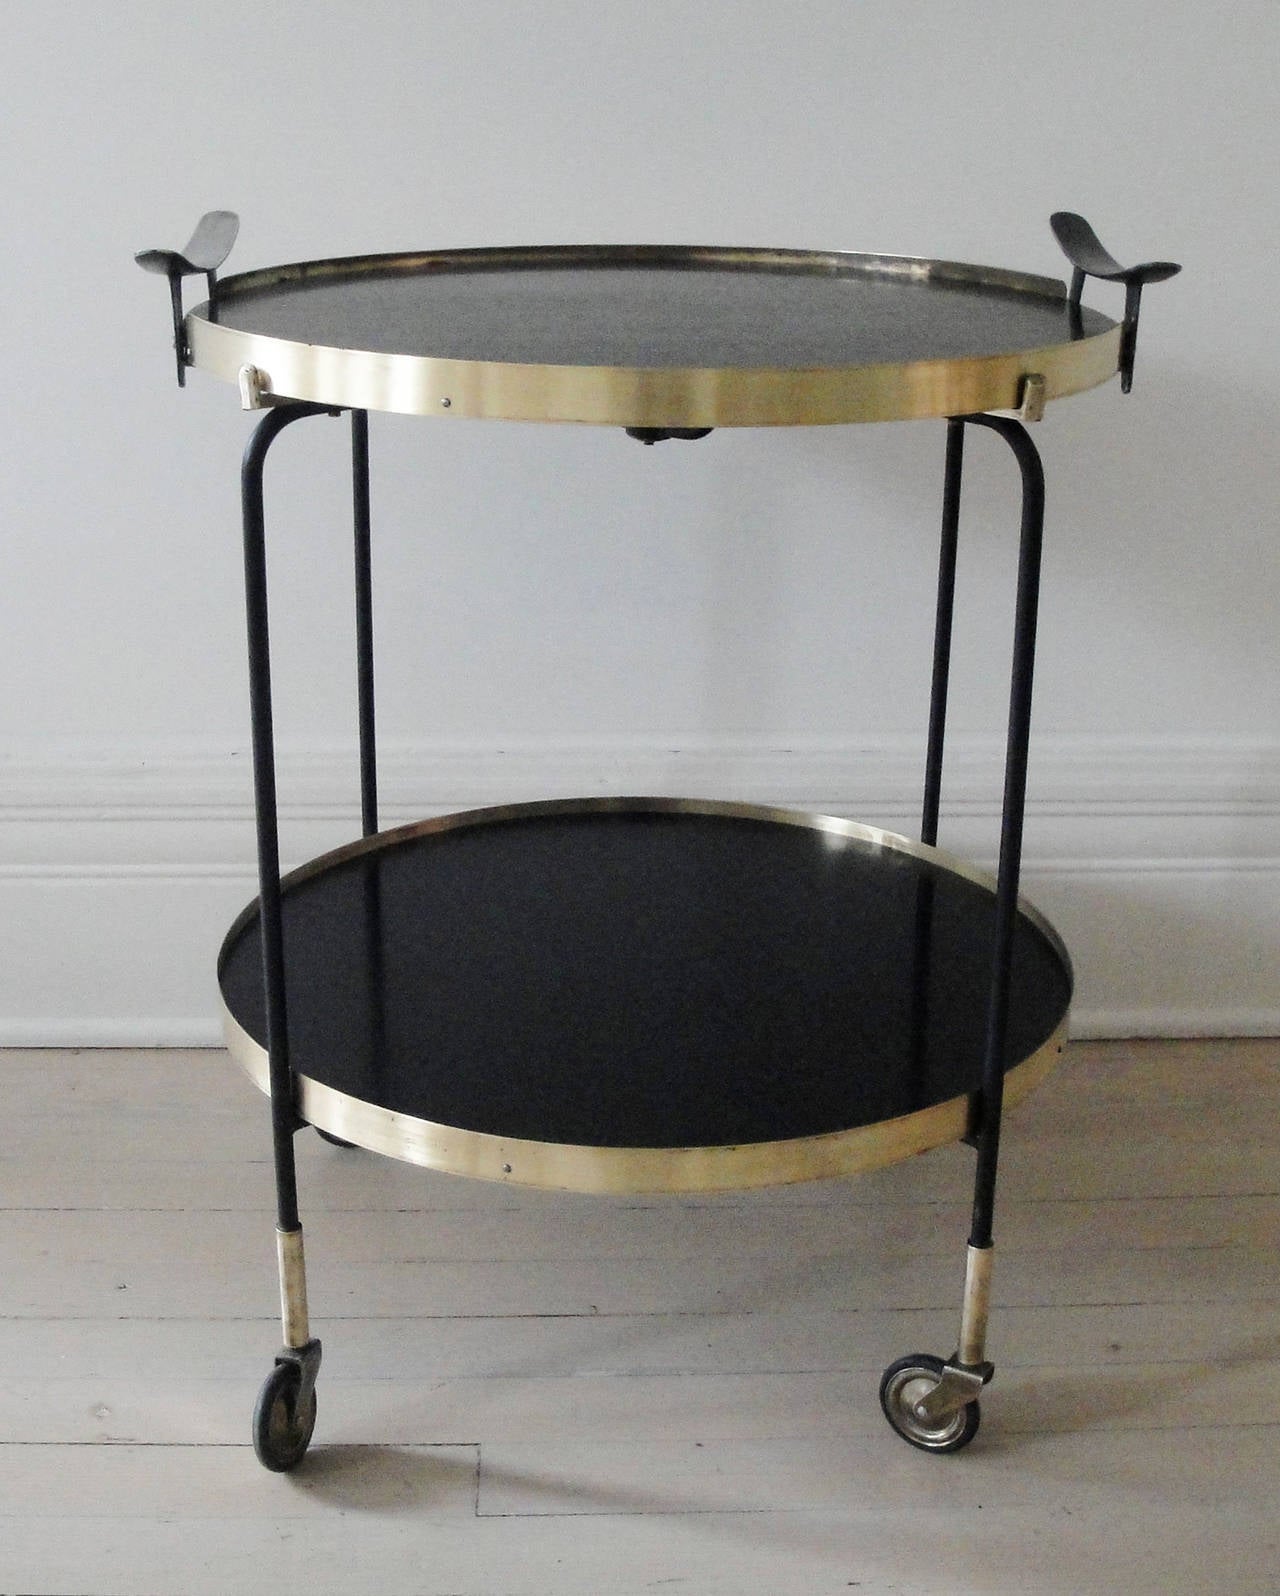 Round double-tier Italian bar cart from 1960s. Brass and black lacquered metal structure. Wooden trays with brass fittings. Removable top tray with metal handles.